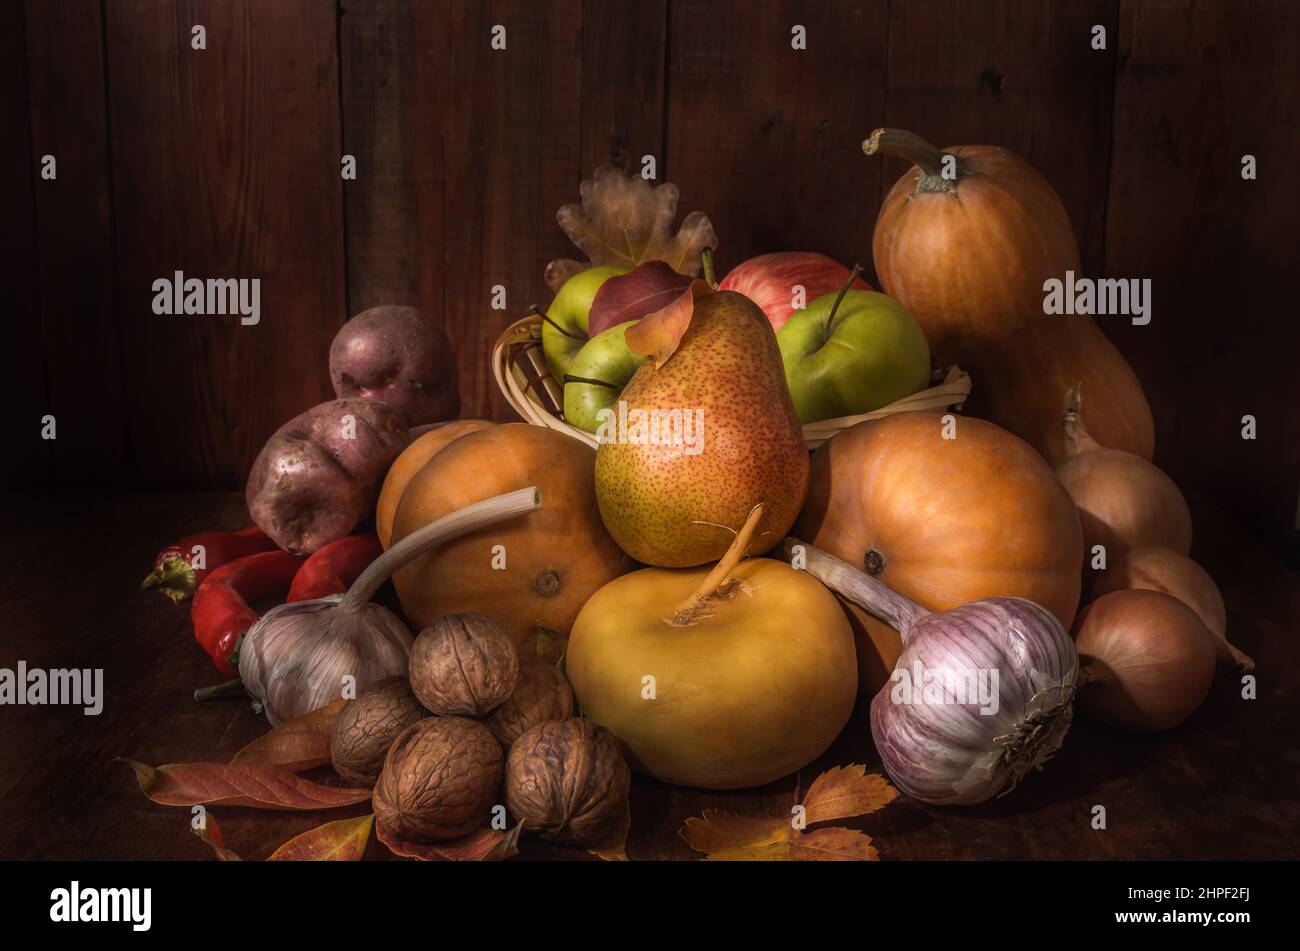 Fruits and vegetables on a dark wooden background in a rustic style Stock Photo